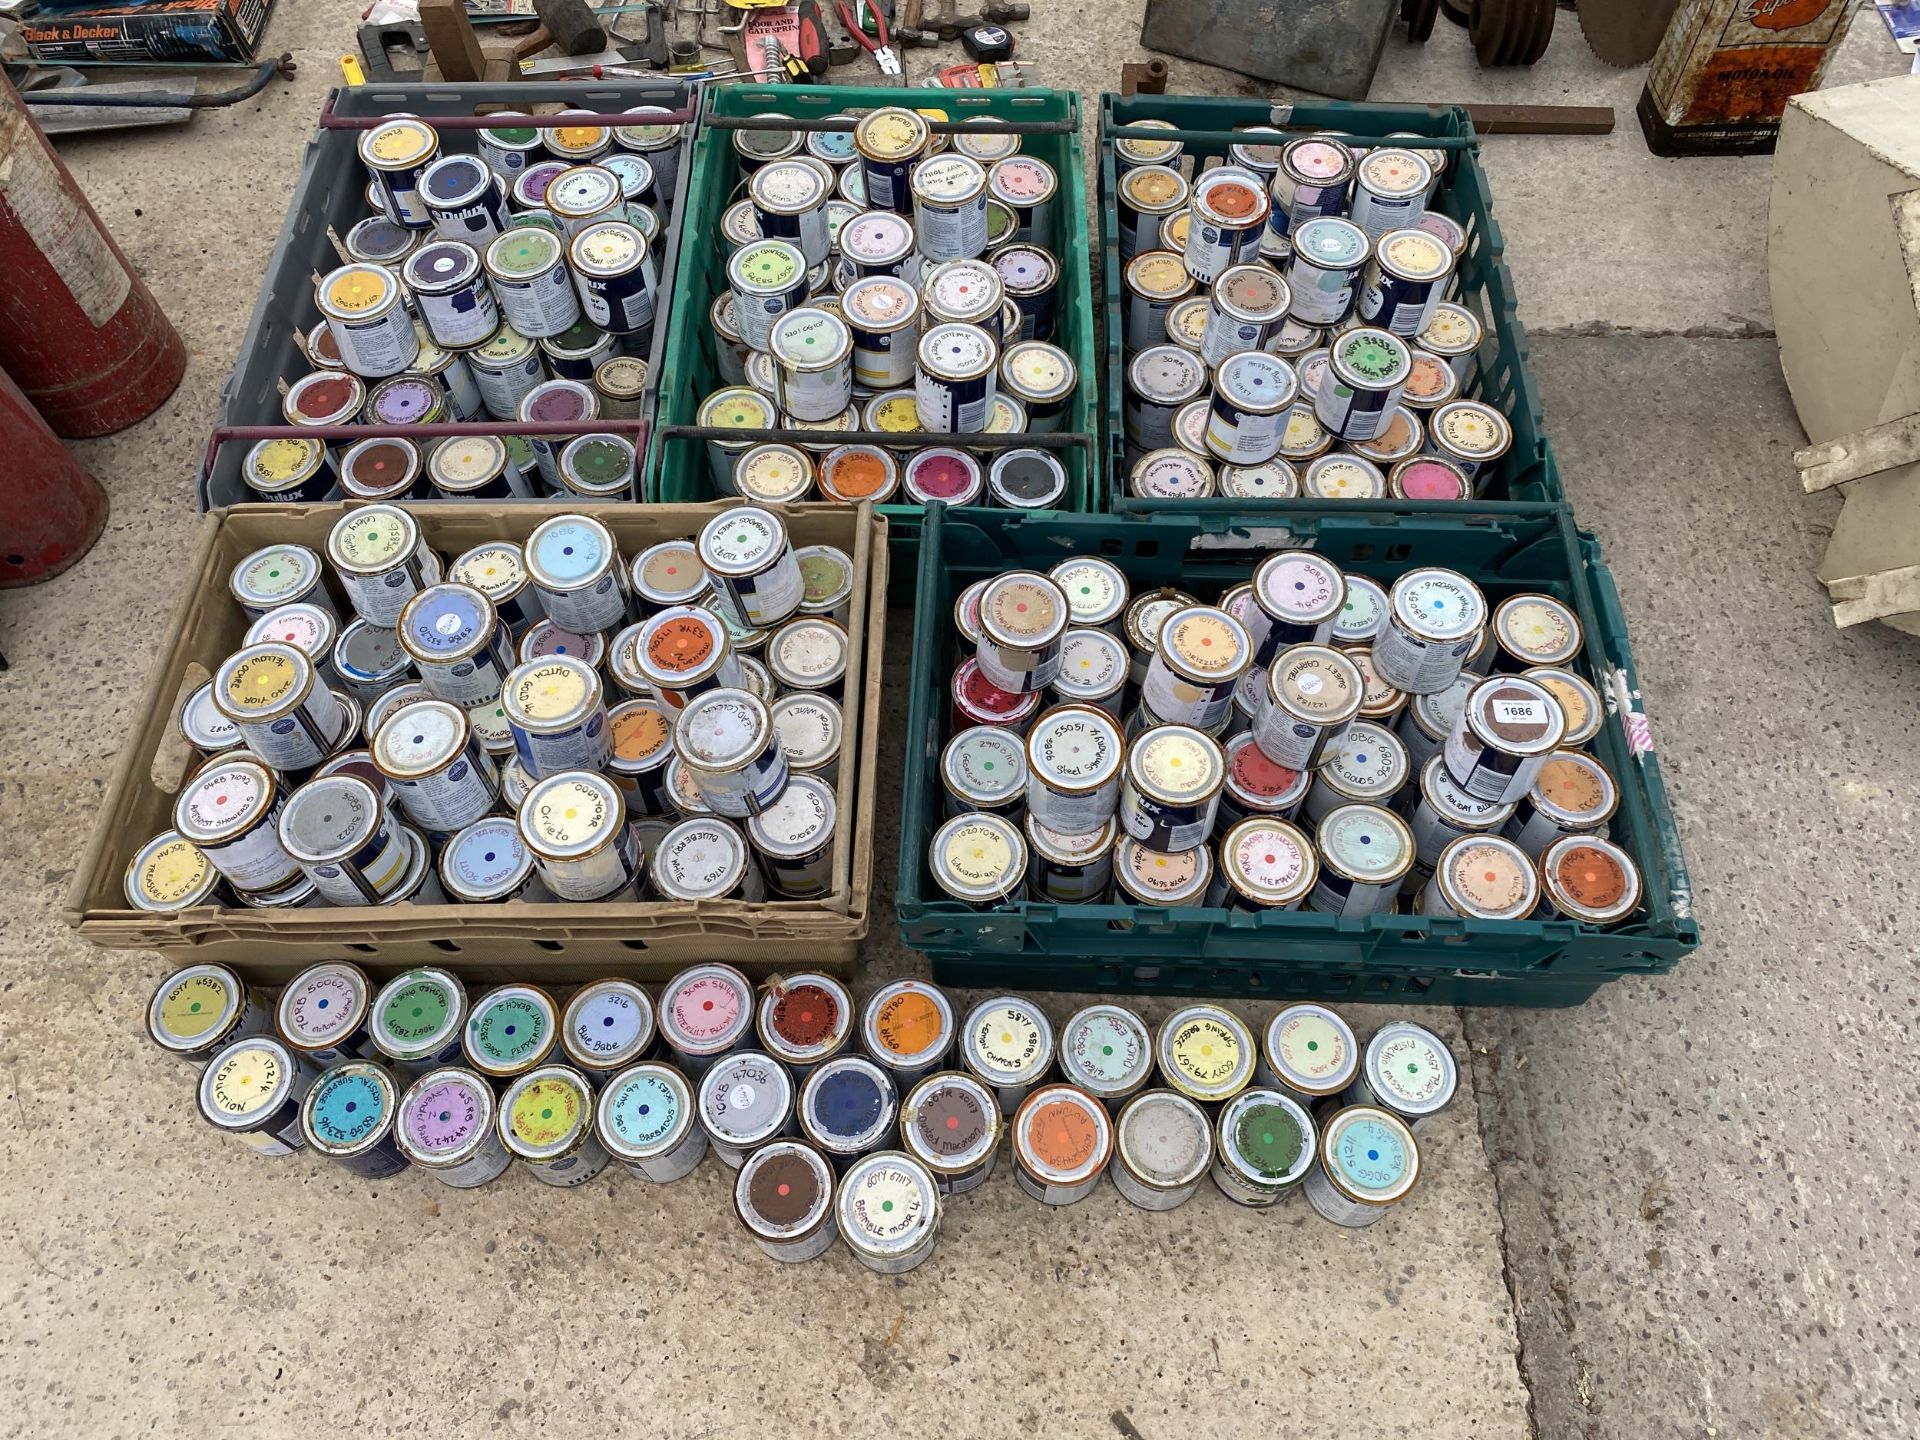 A LARGE QUANTITY OF SMALL TINS OF PAINT